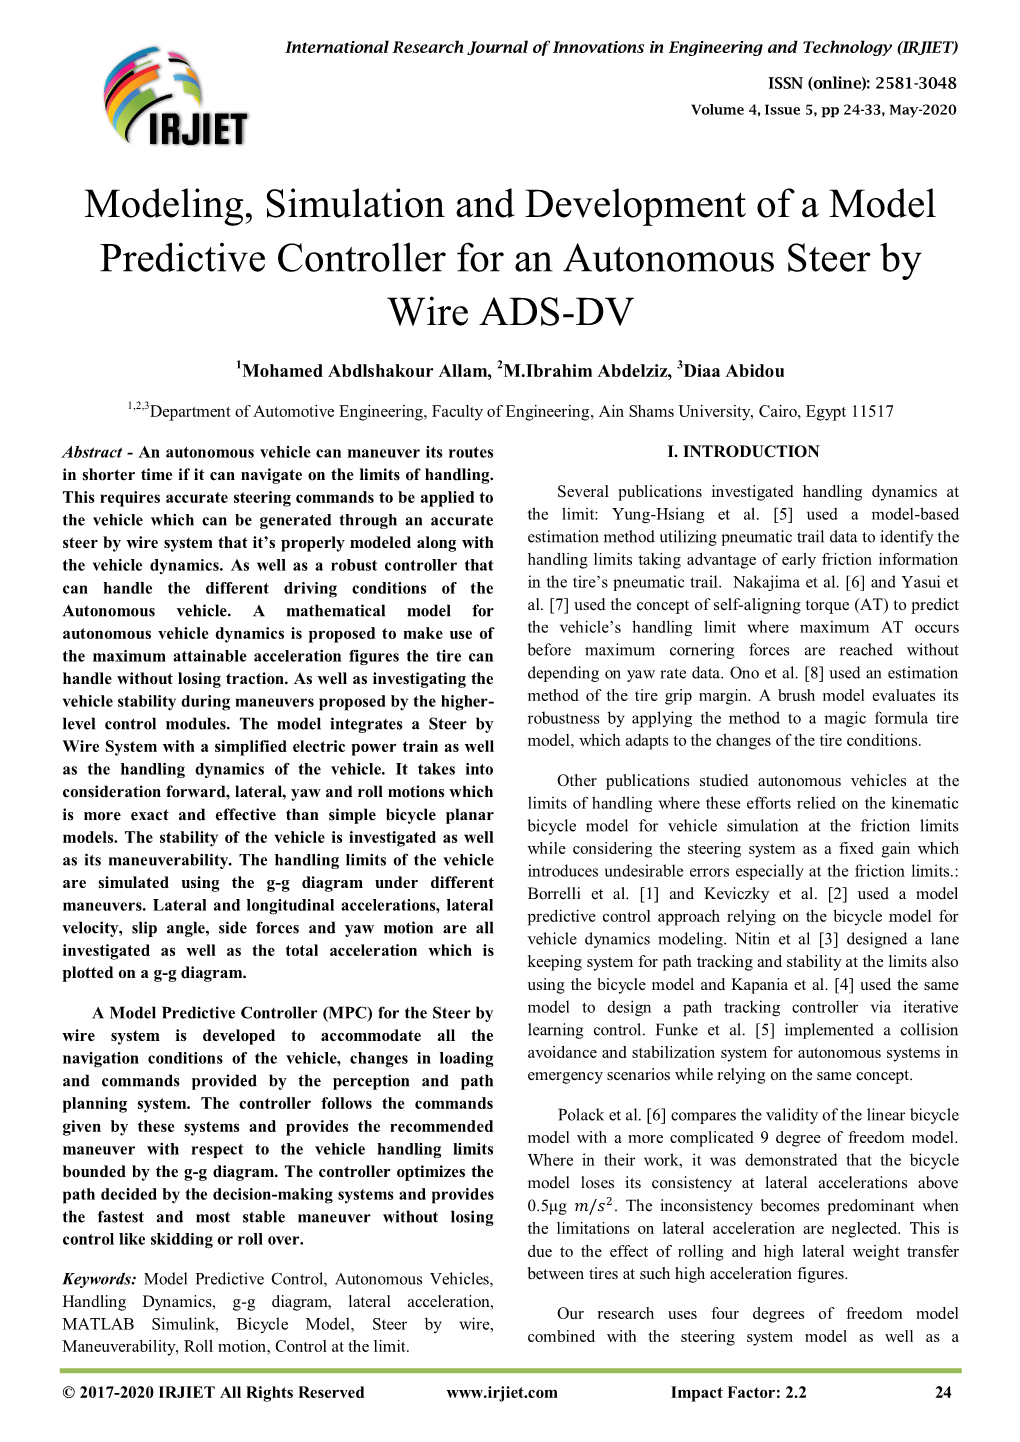 Modeling, Simulation and Development of a Model Predictive Controller for an Autonomous Steer by Wire ADS-DV